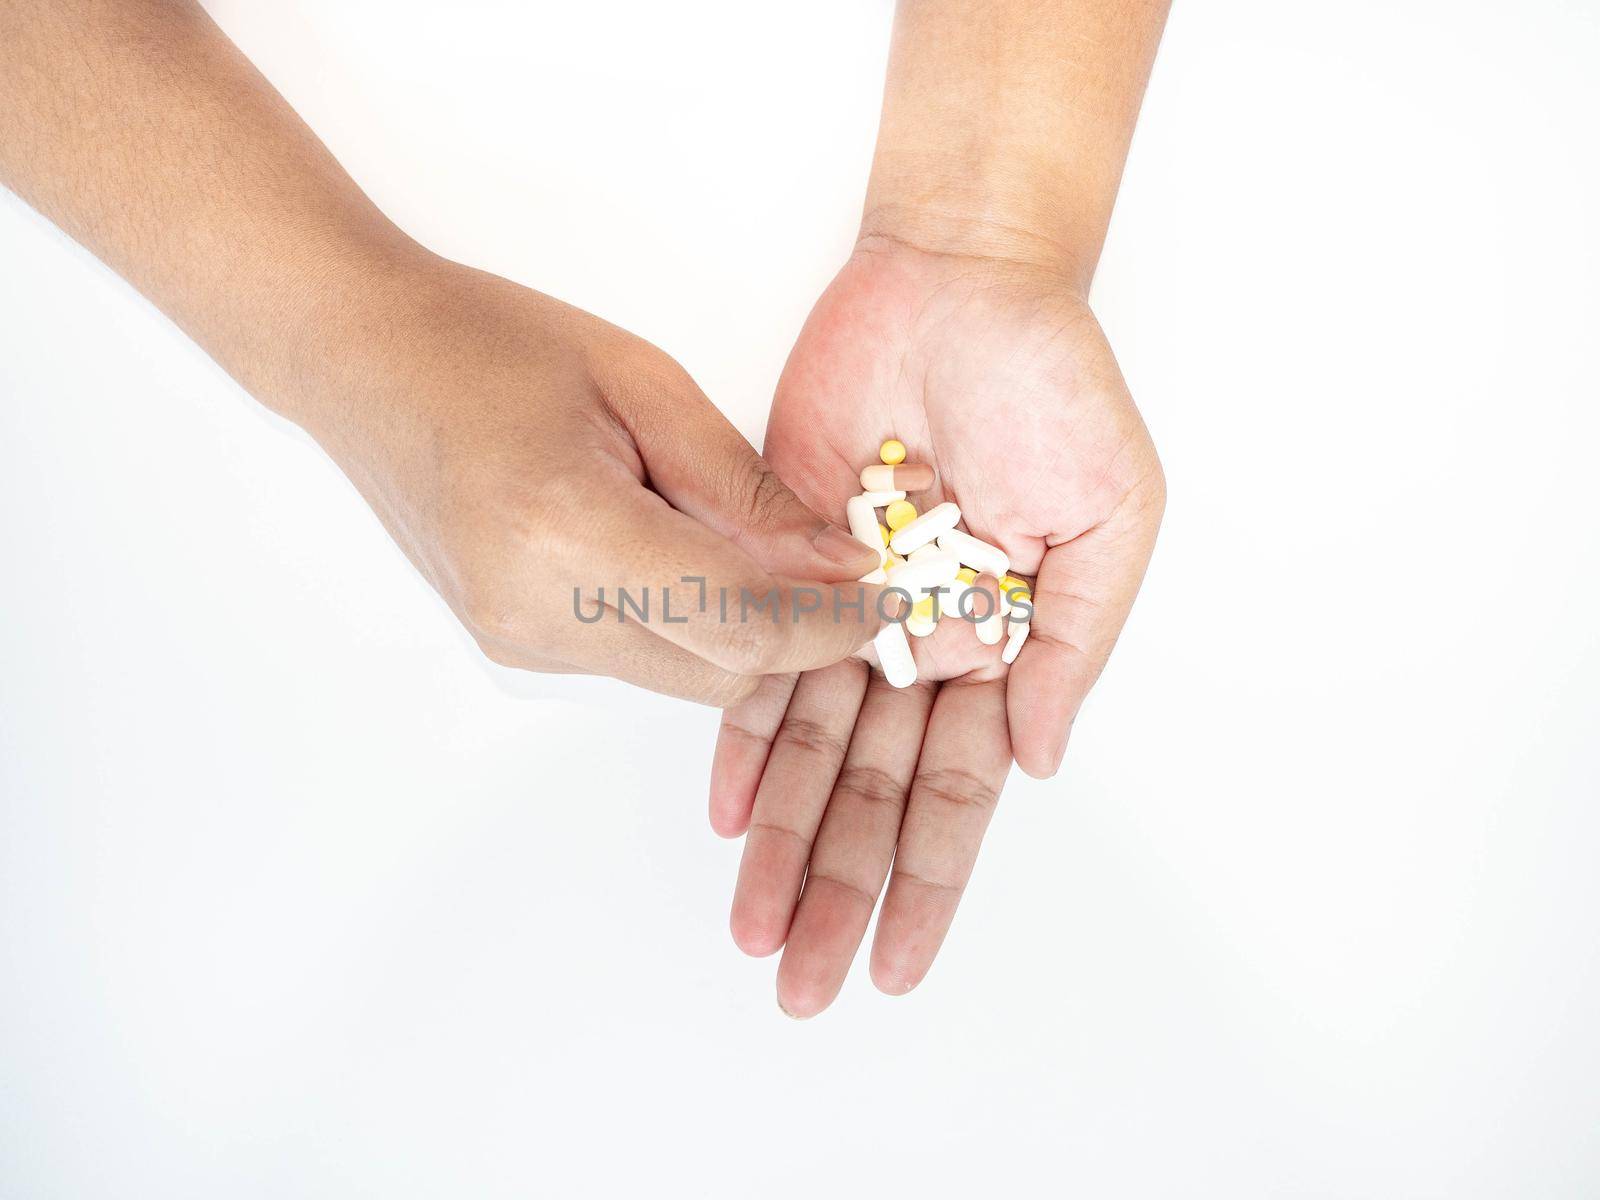 A woman picks up a pill from her hand White background.